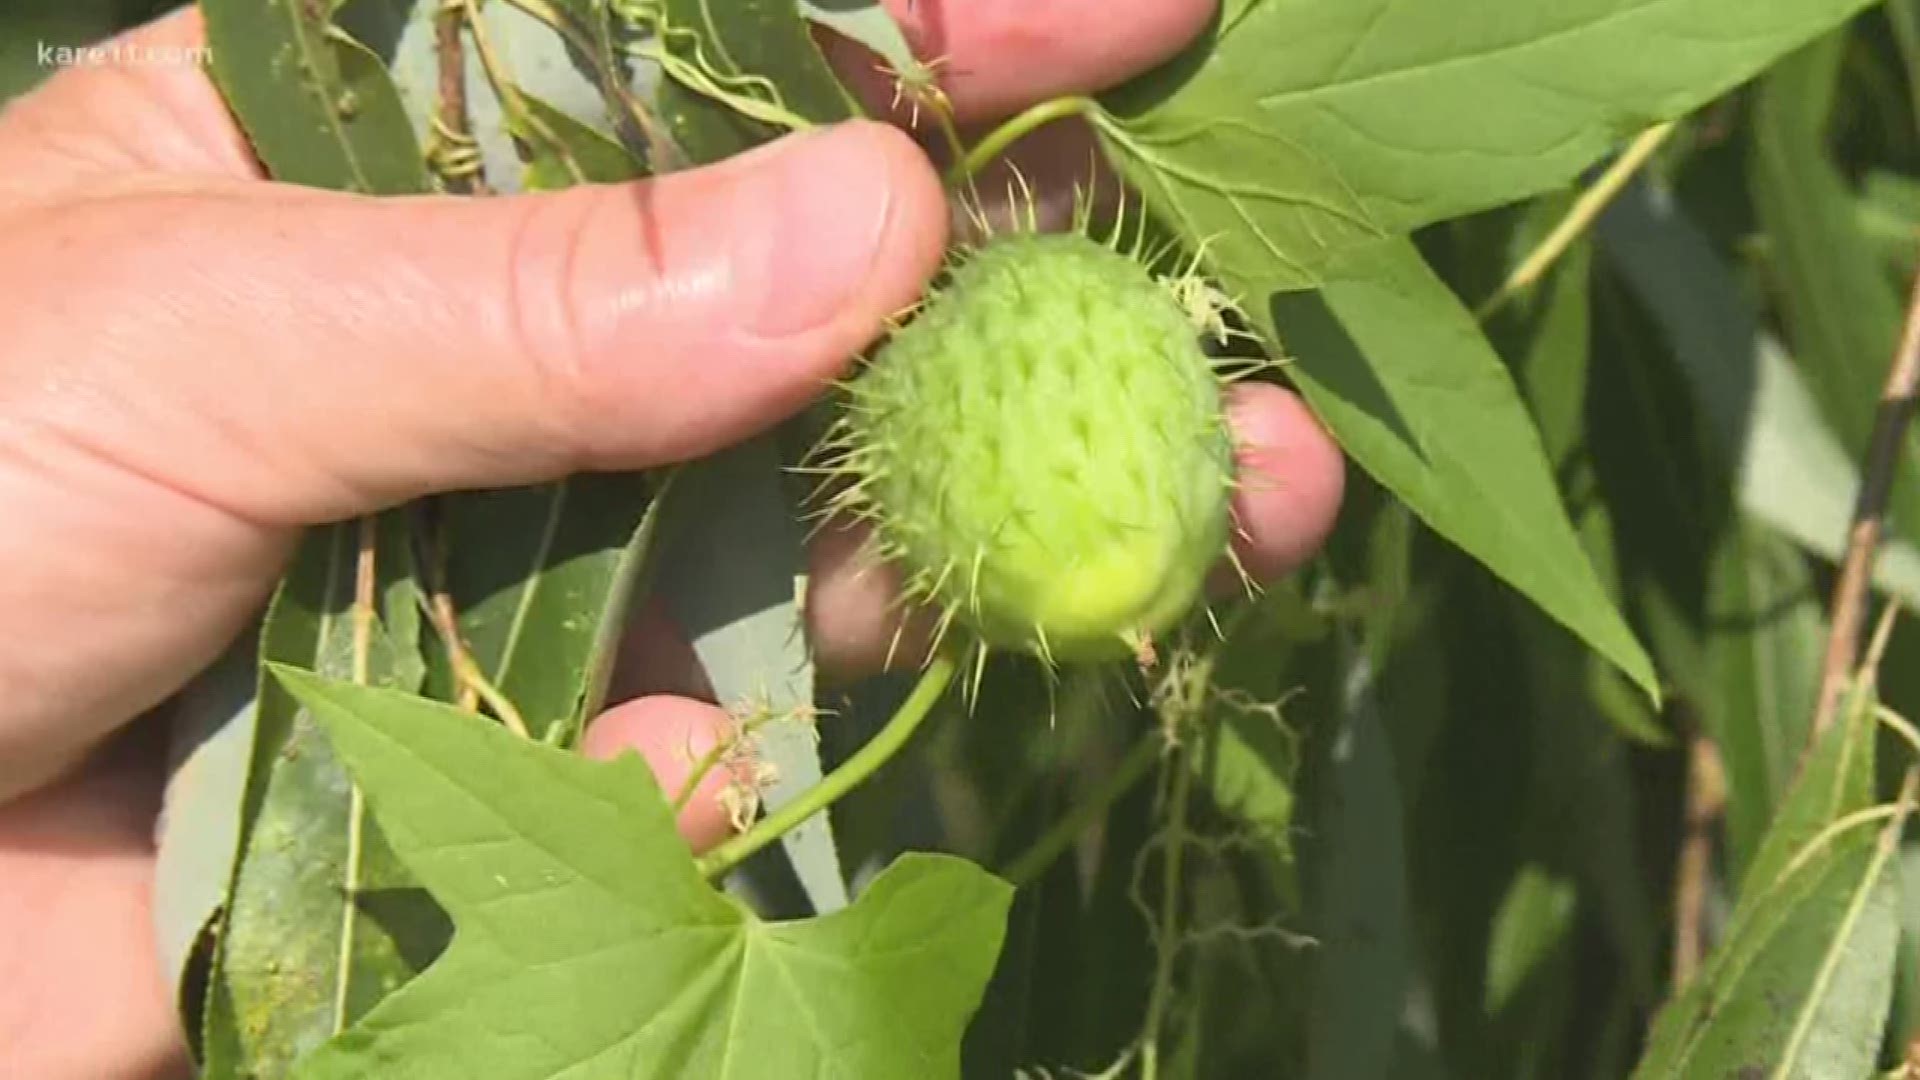 They are visible from the highway and appear to be smothering bushes and trees. But experts say wild cucumbers aren't as bad as they look. https://kare11.tv/2O6d5FP